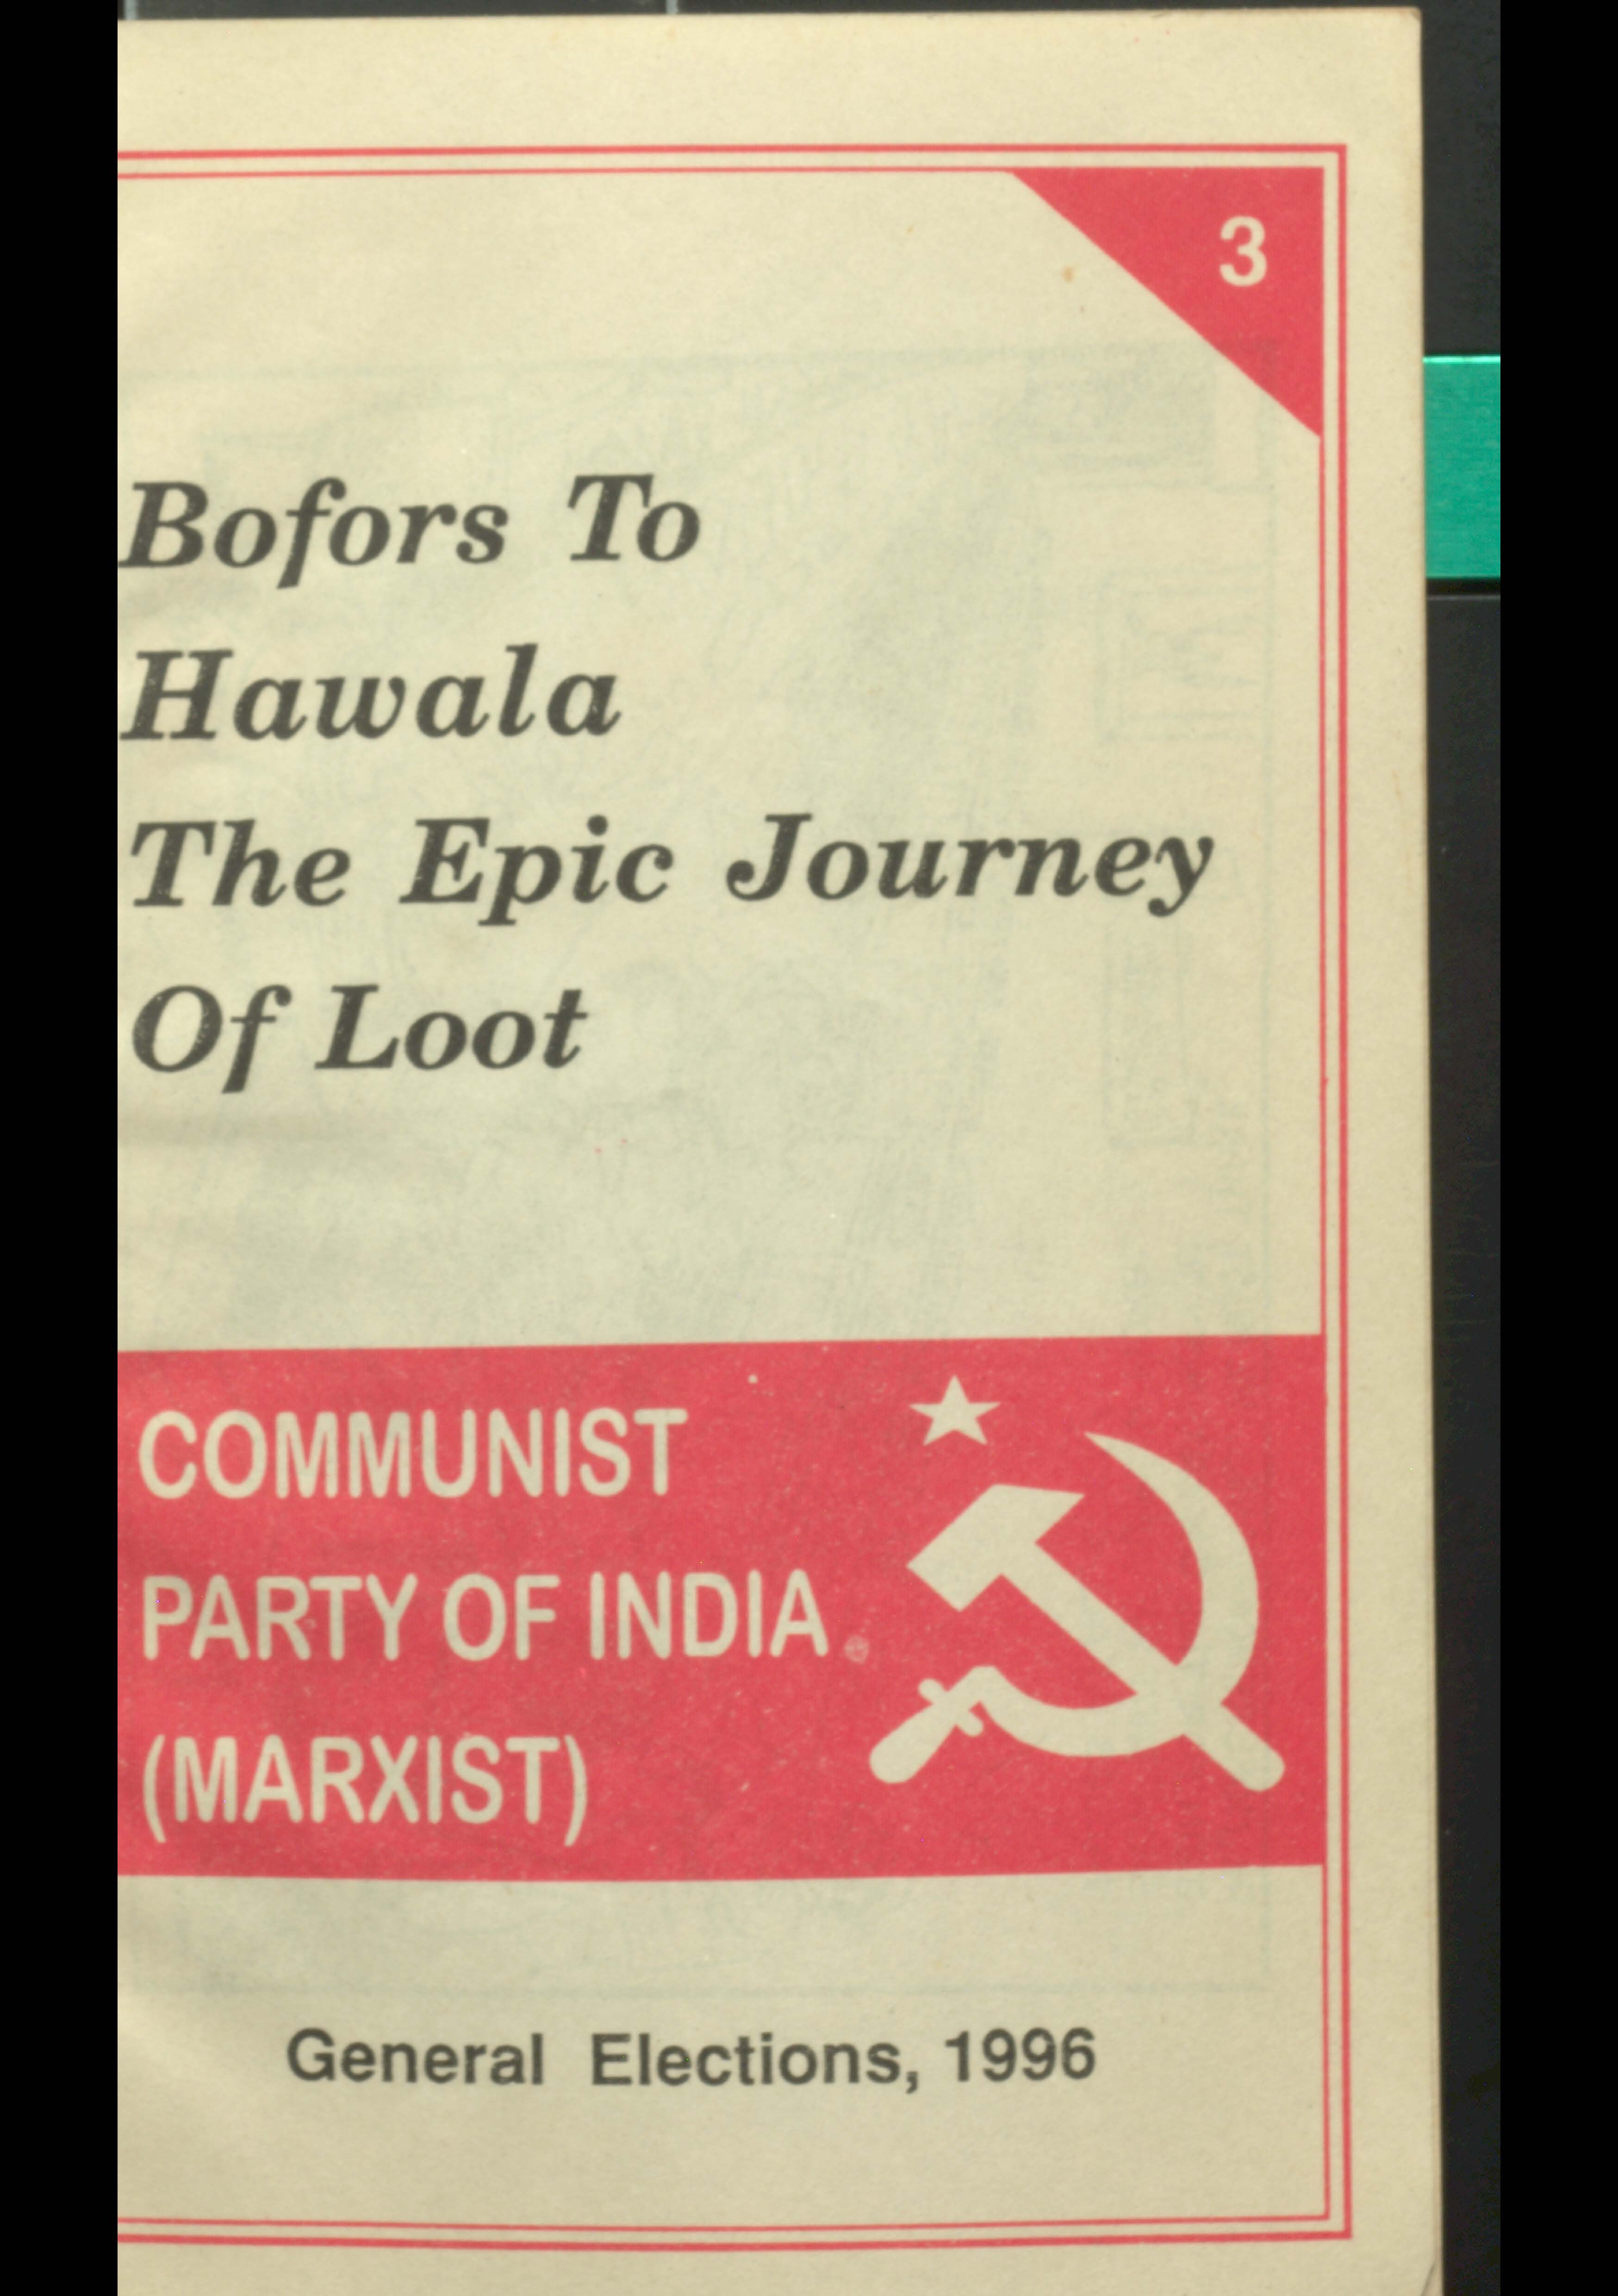 Bofors to hawala the epic journey of loote CPI(M)